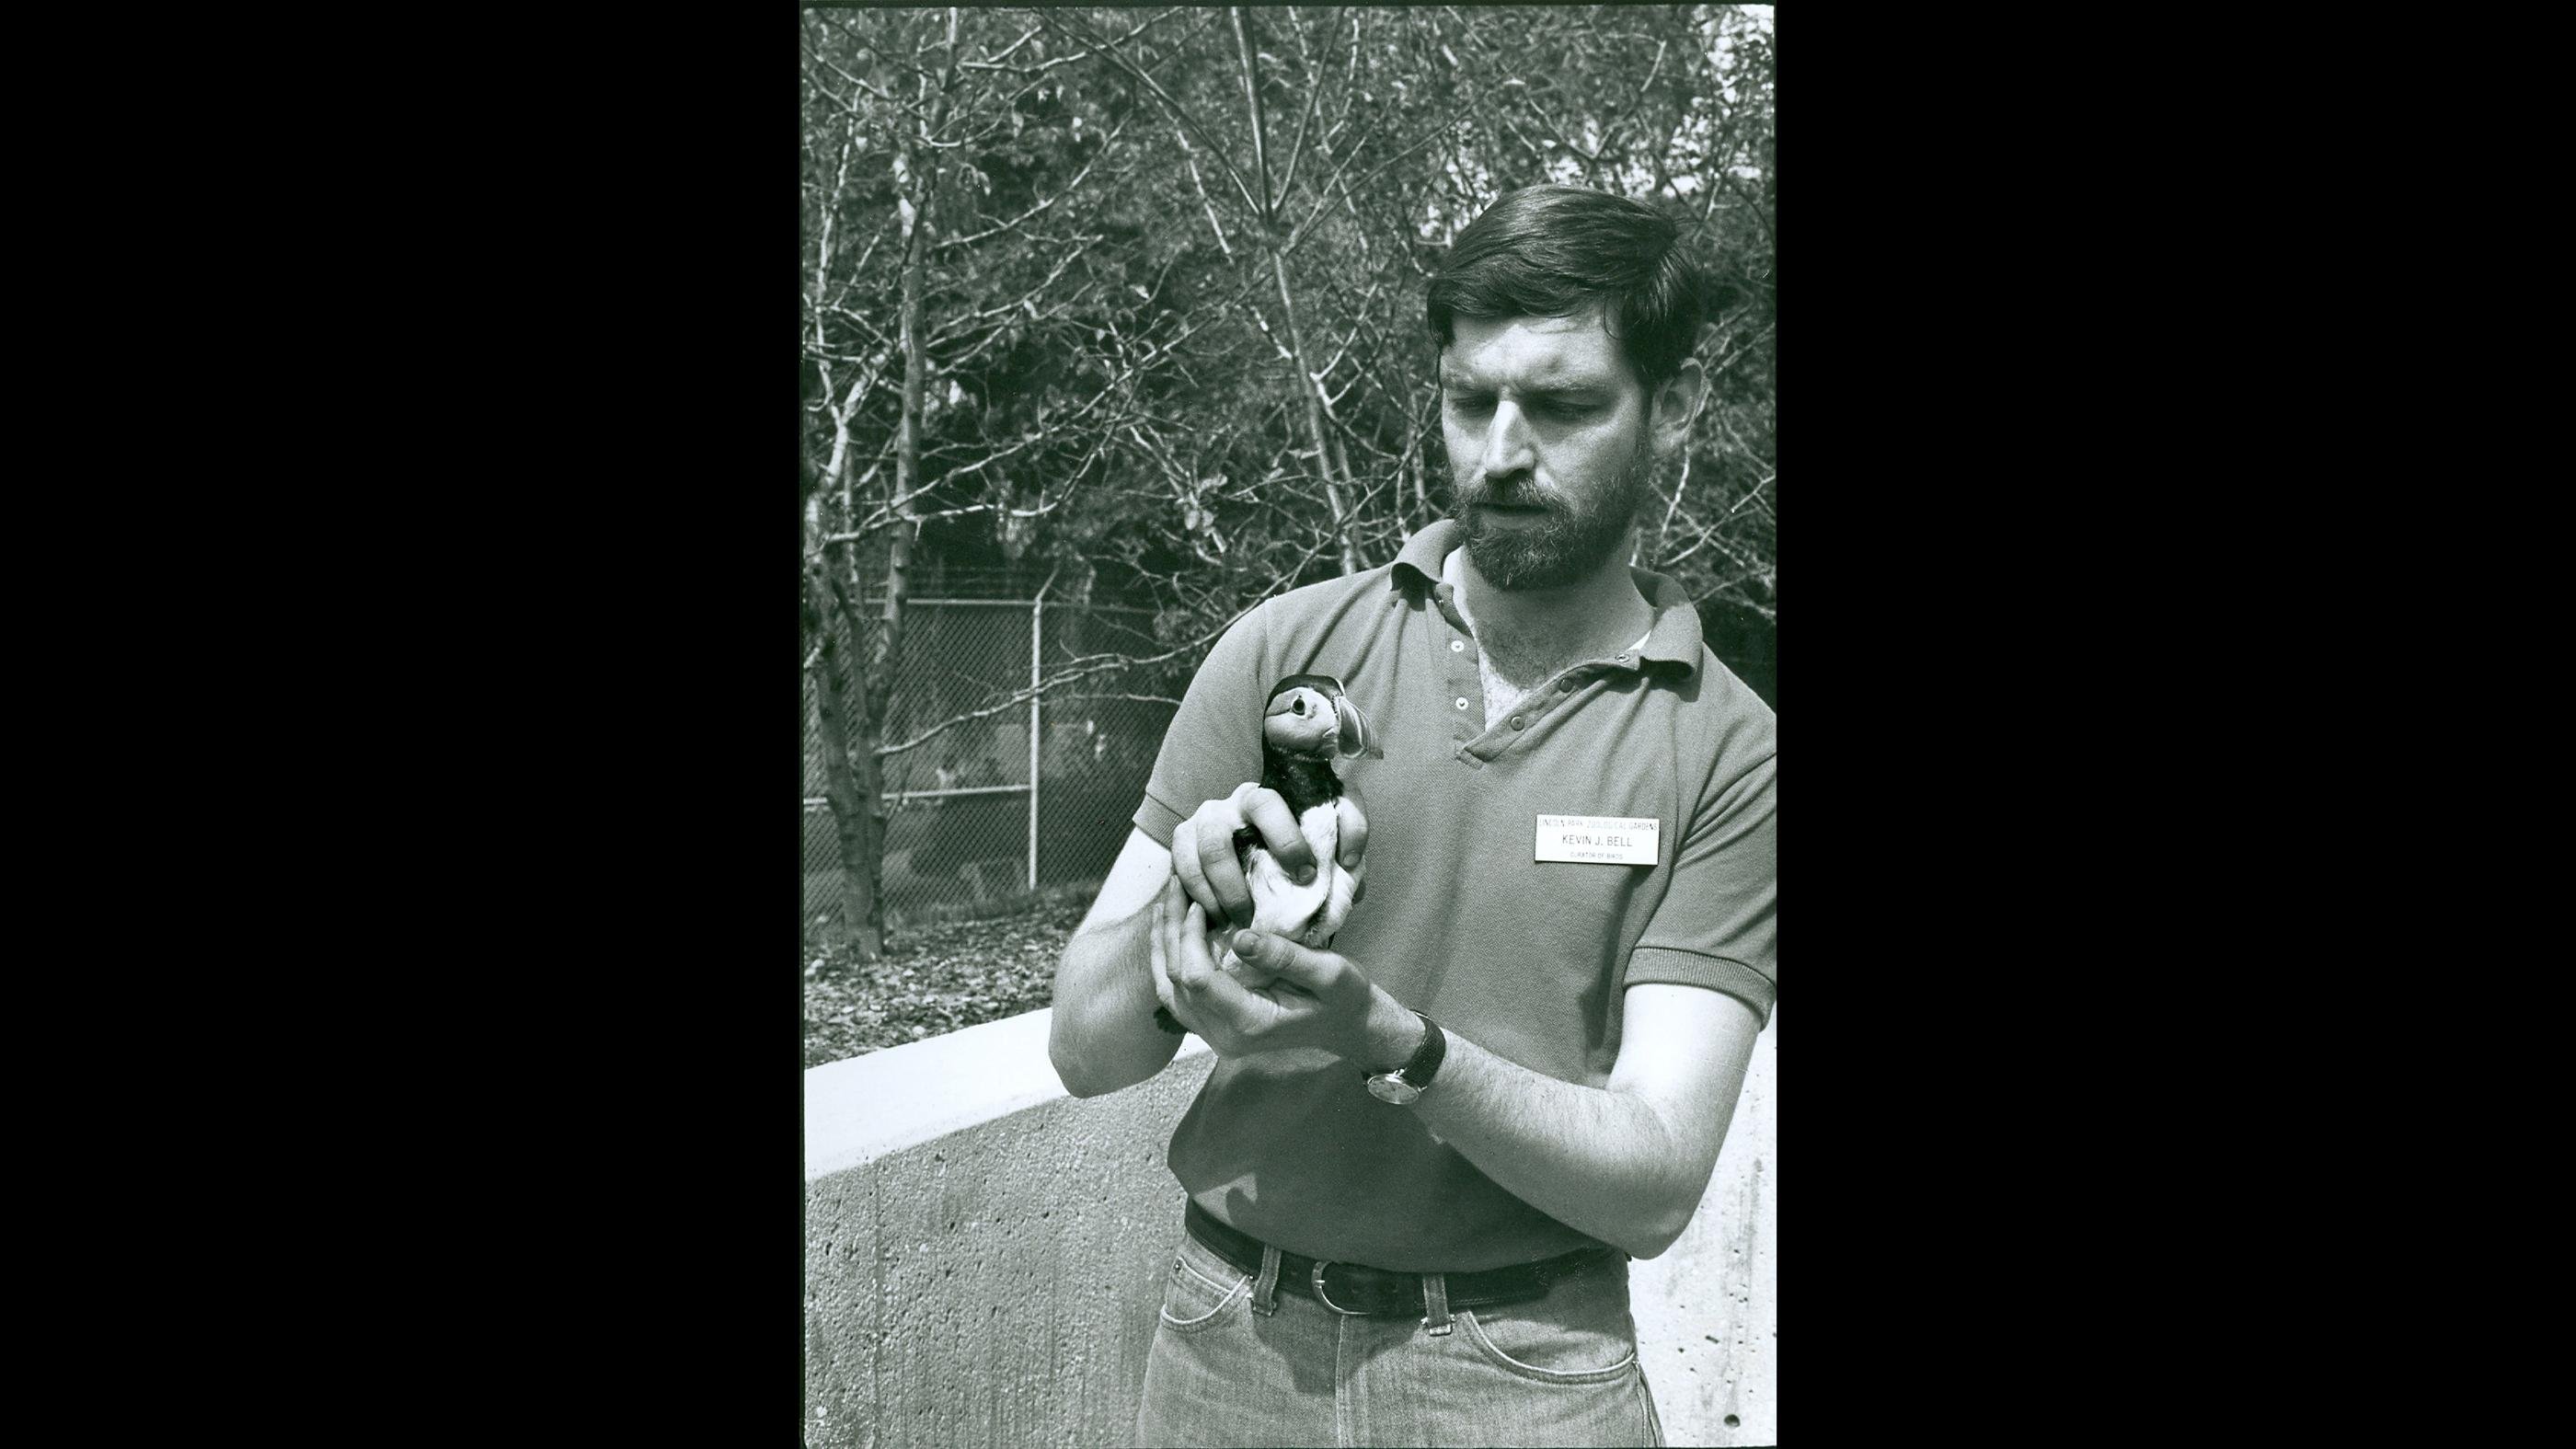 Current Lincoln Park Zoo President and CEO Kevin Bell shown here in 1981, when he was the zoo's curator of birds. (Courtesy Chicago Park District and Chicago History Museum)